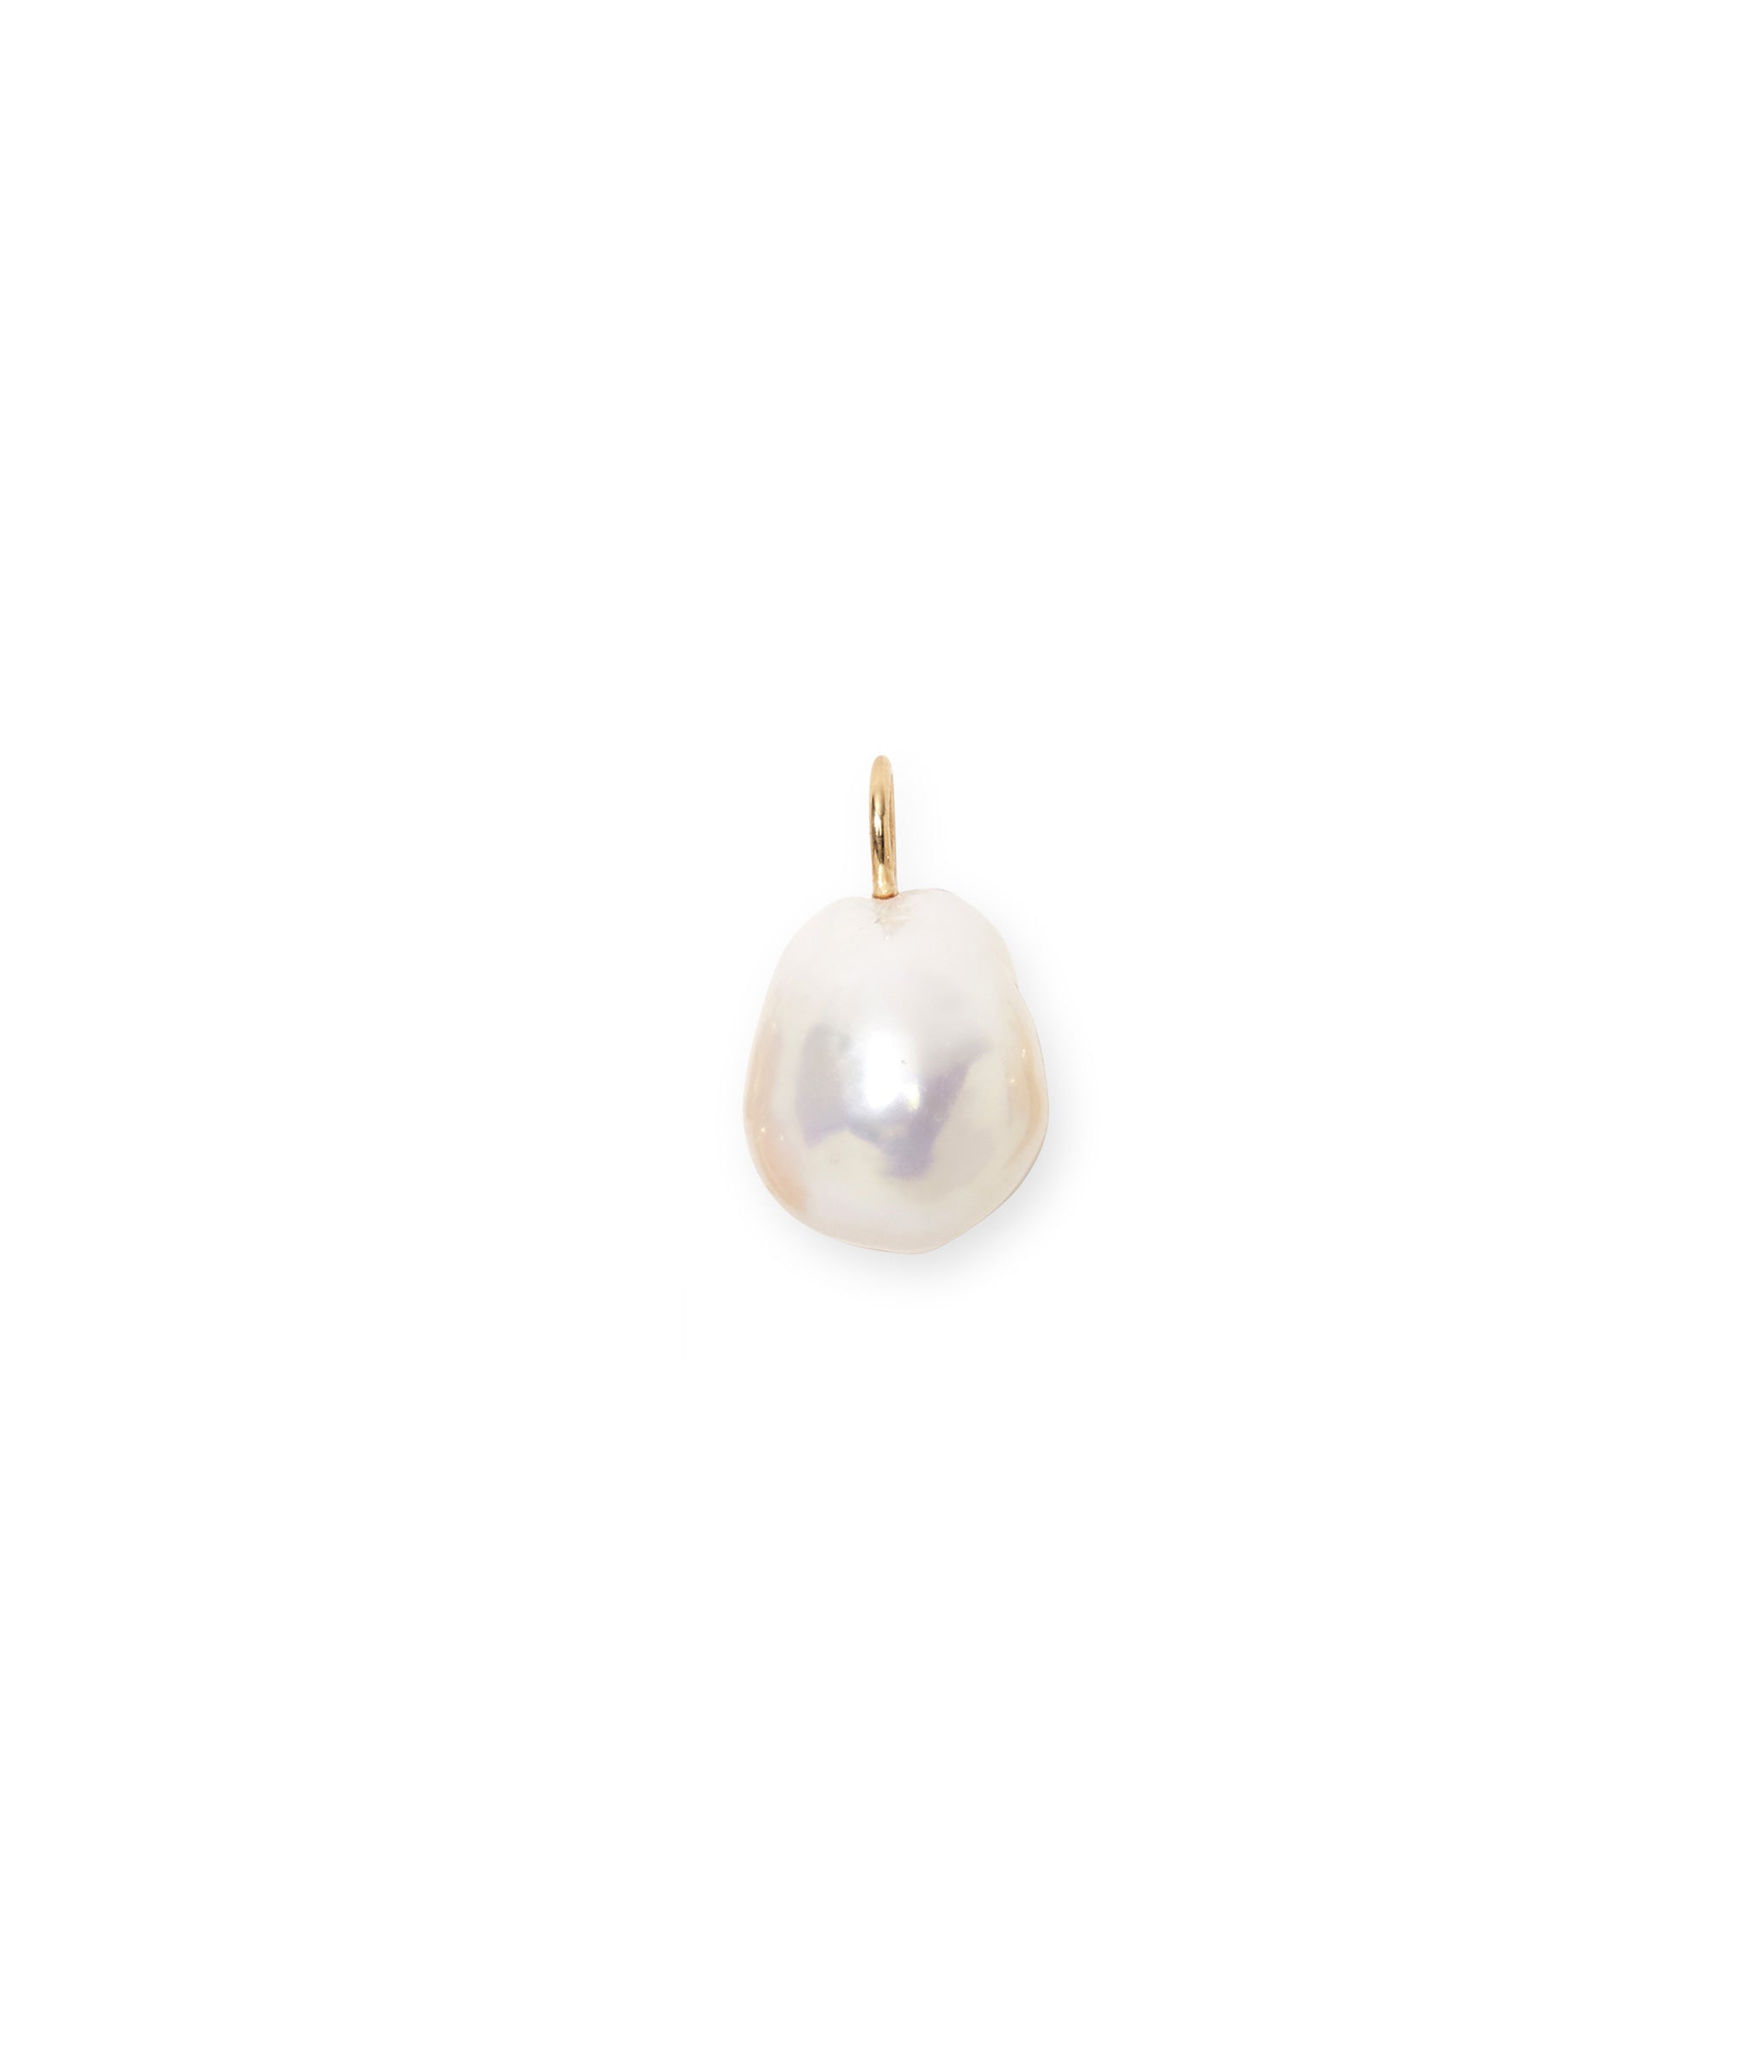 Freshwater Pearl & 14k Gold Necklace Charm.